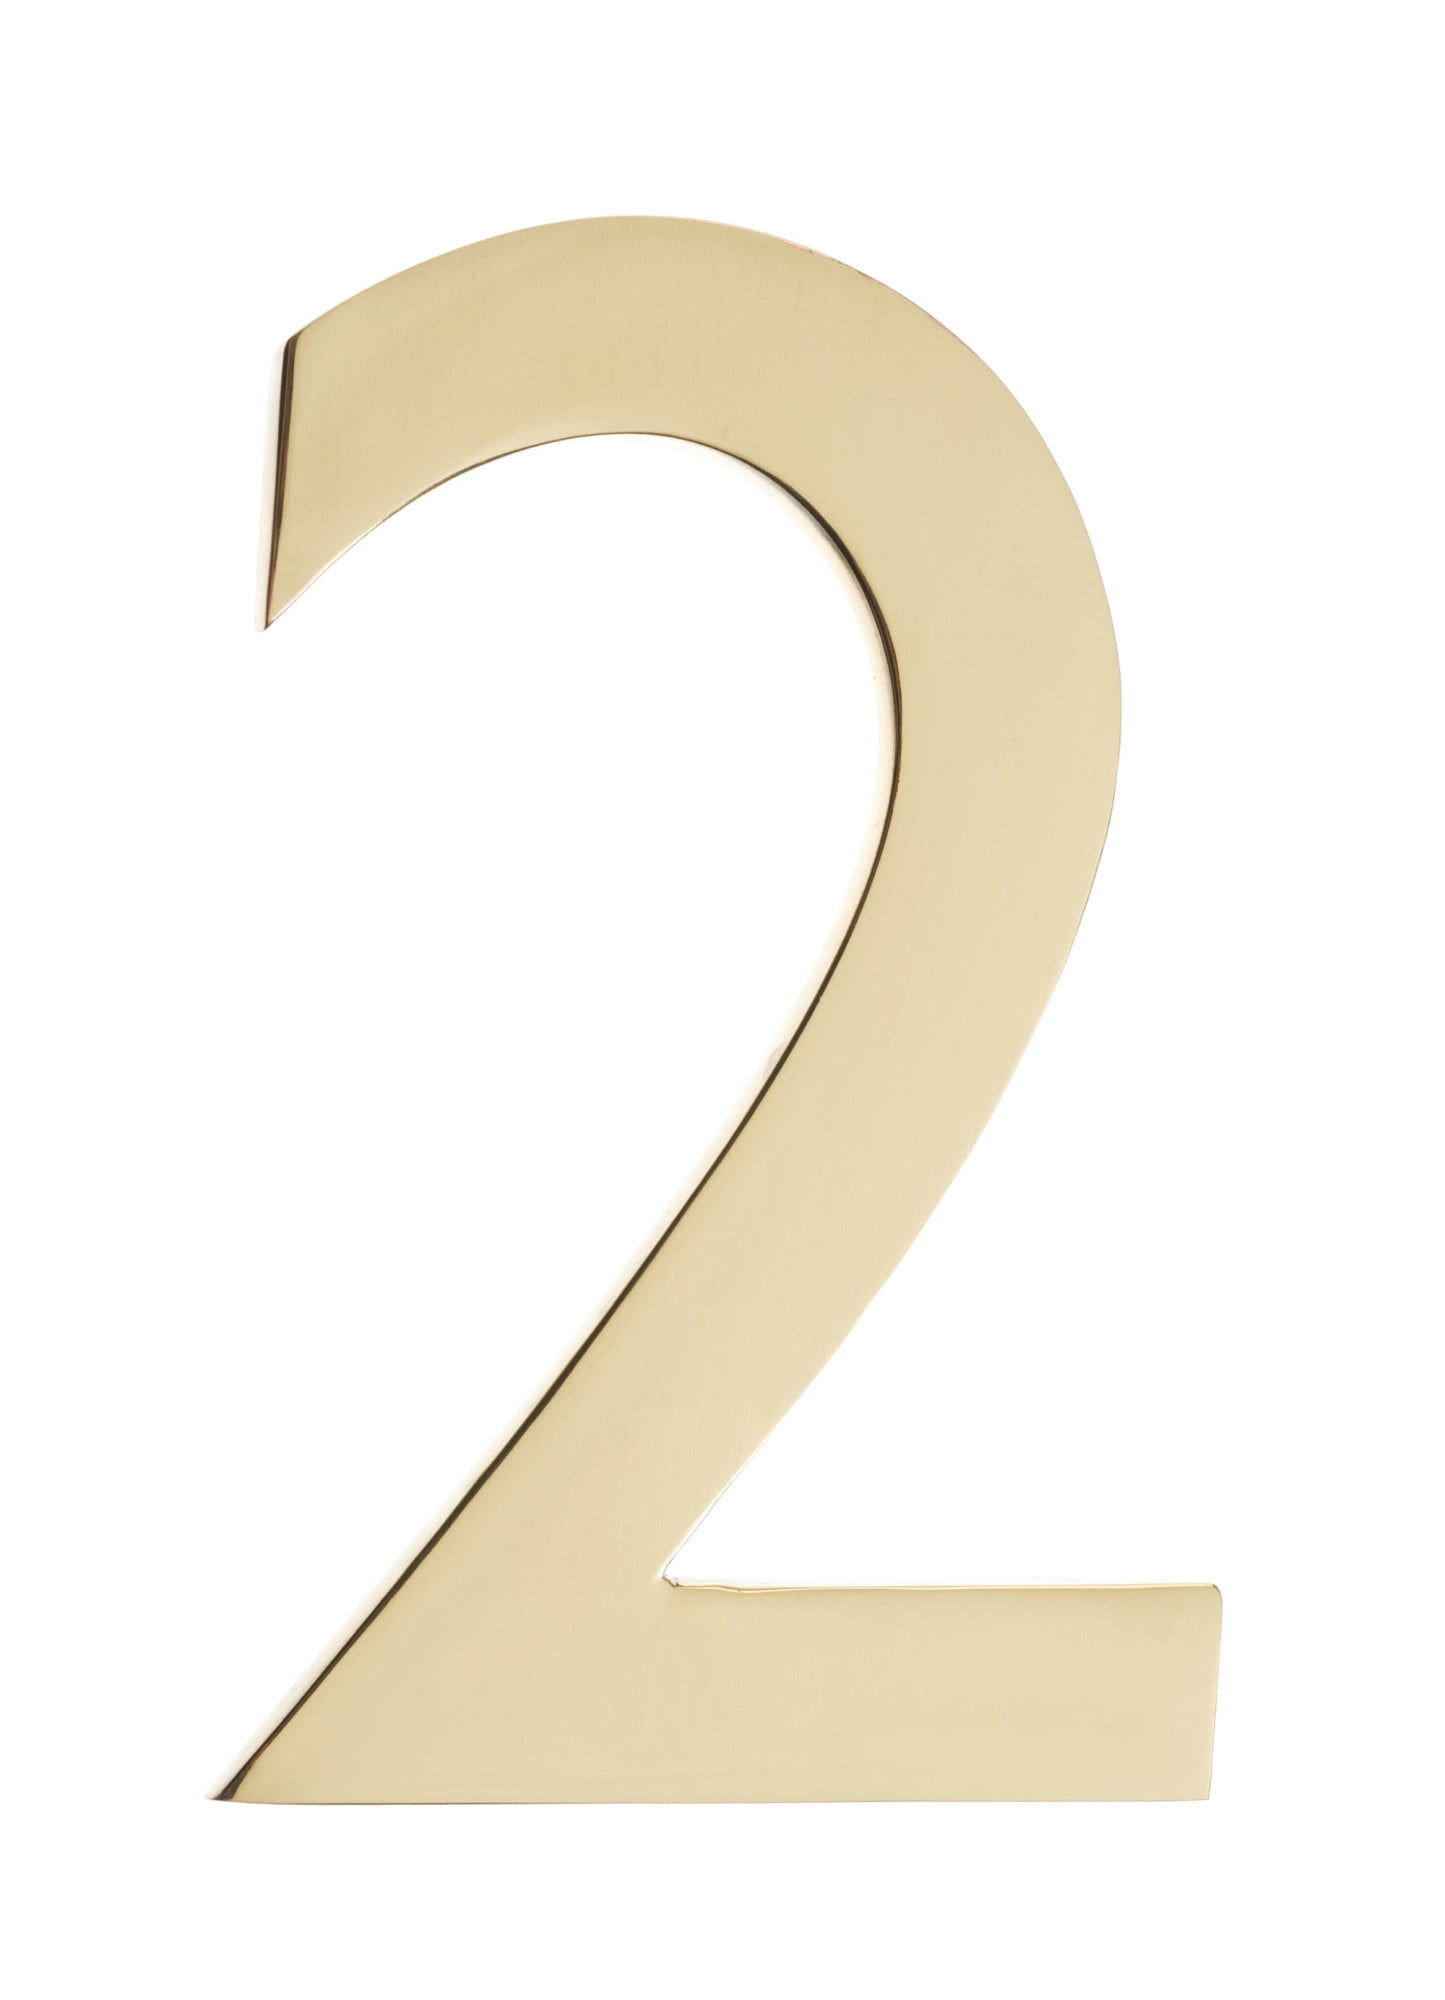 Floating House Number 2, Polished Brass - 4 In.